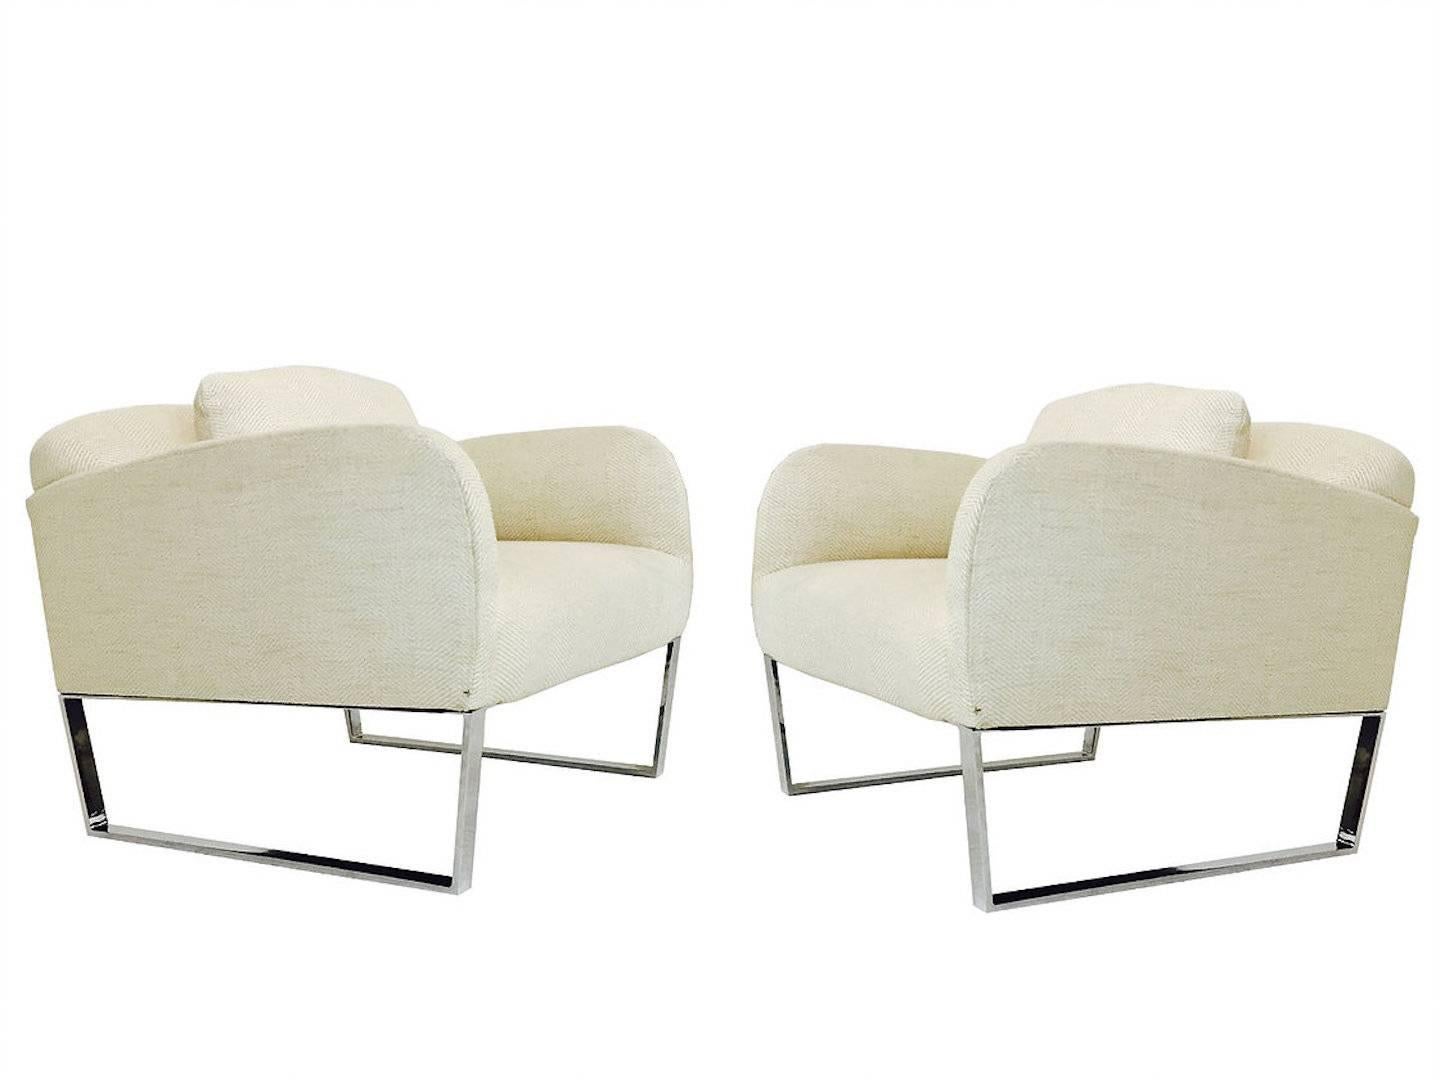 Pair of chrome Donghia Focal deco style lounge chairs in the style of Milo Baughman created by Angelo Donghia. Chairs are in good vintage condition with minimal visible wear, circa 1980s

Dimensions: 30.5